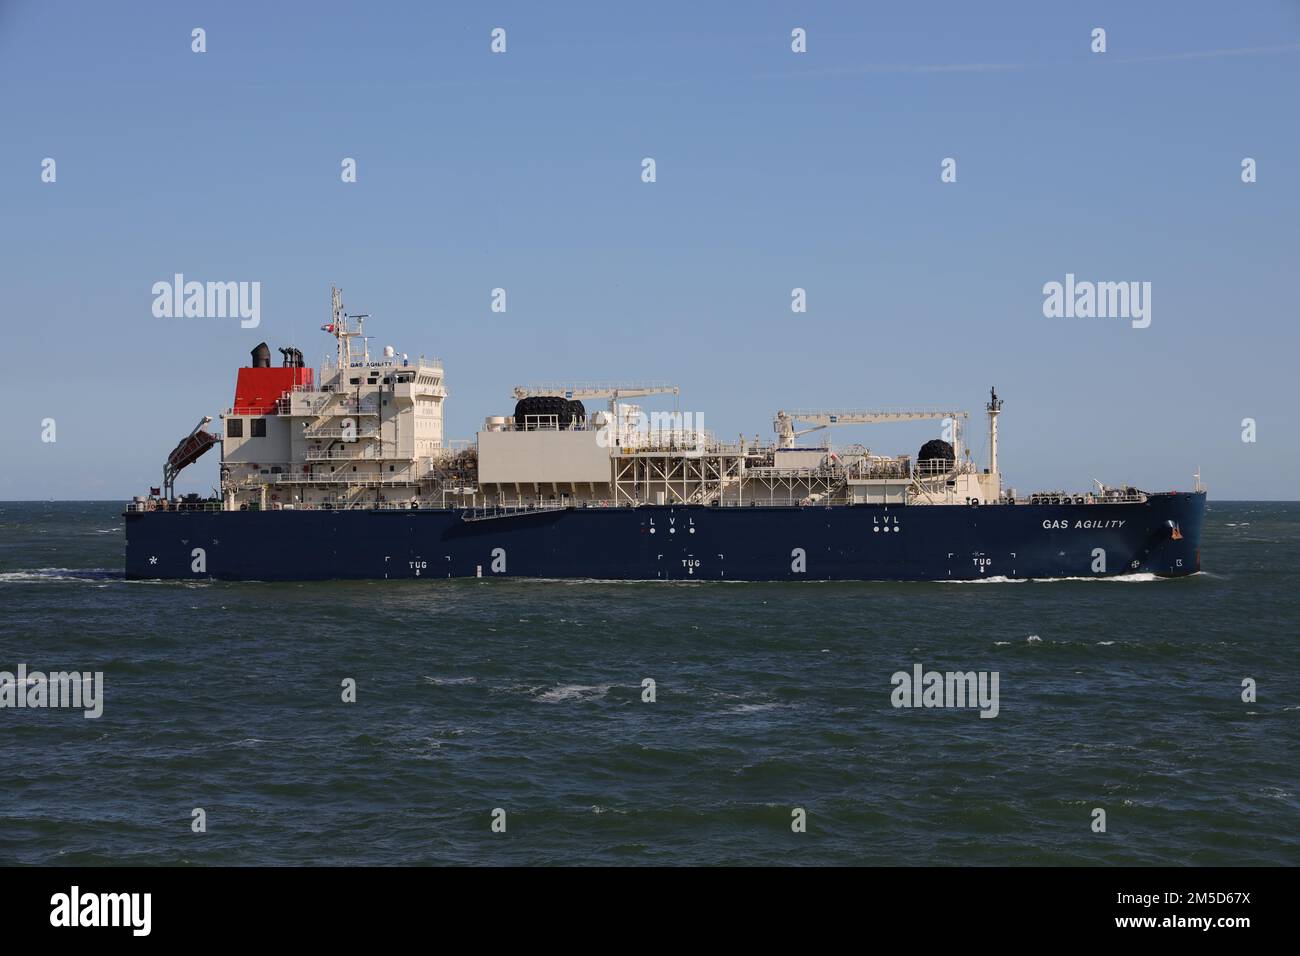 The LNG bunker ship Gas Agility arrives in the port of Rotterdam on August 31, 2022 Stock Photo